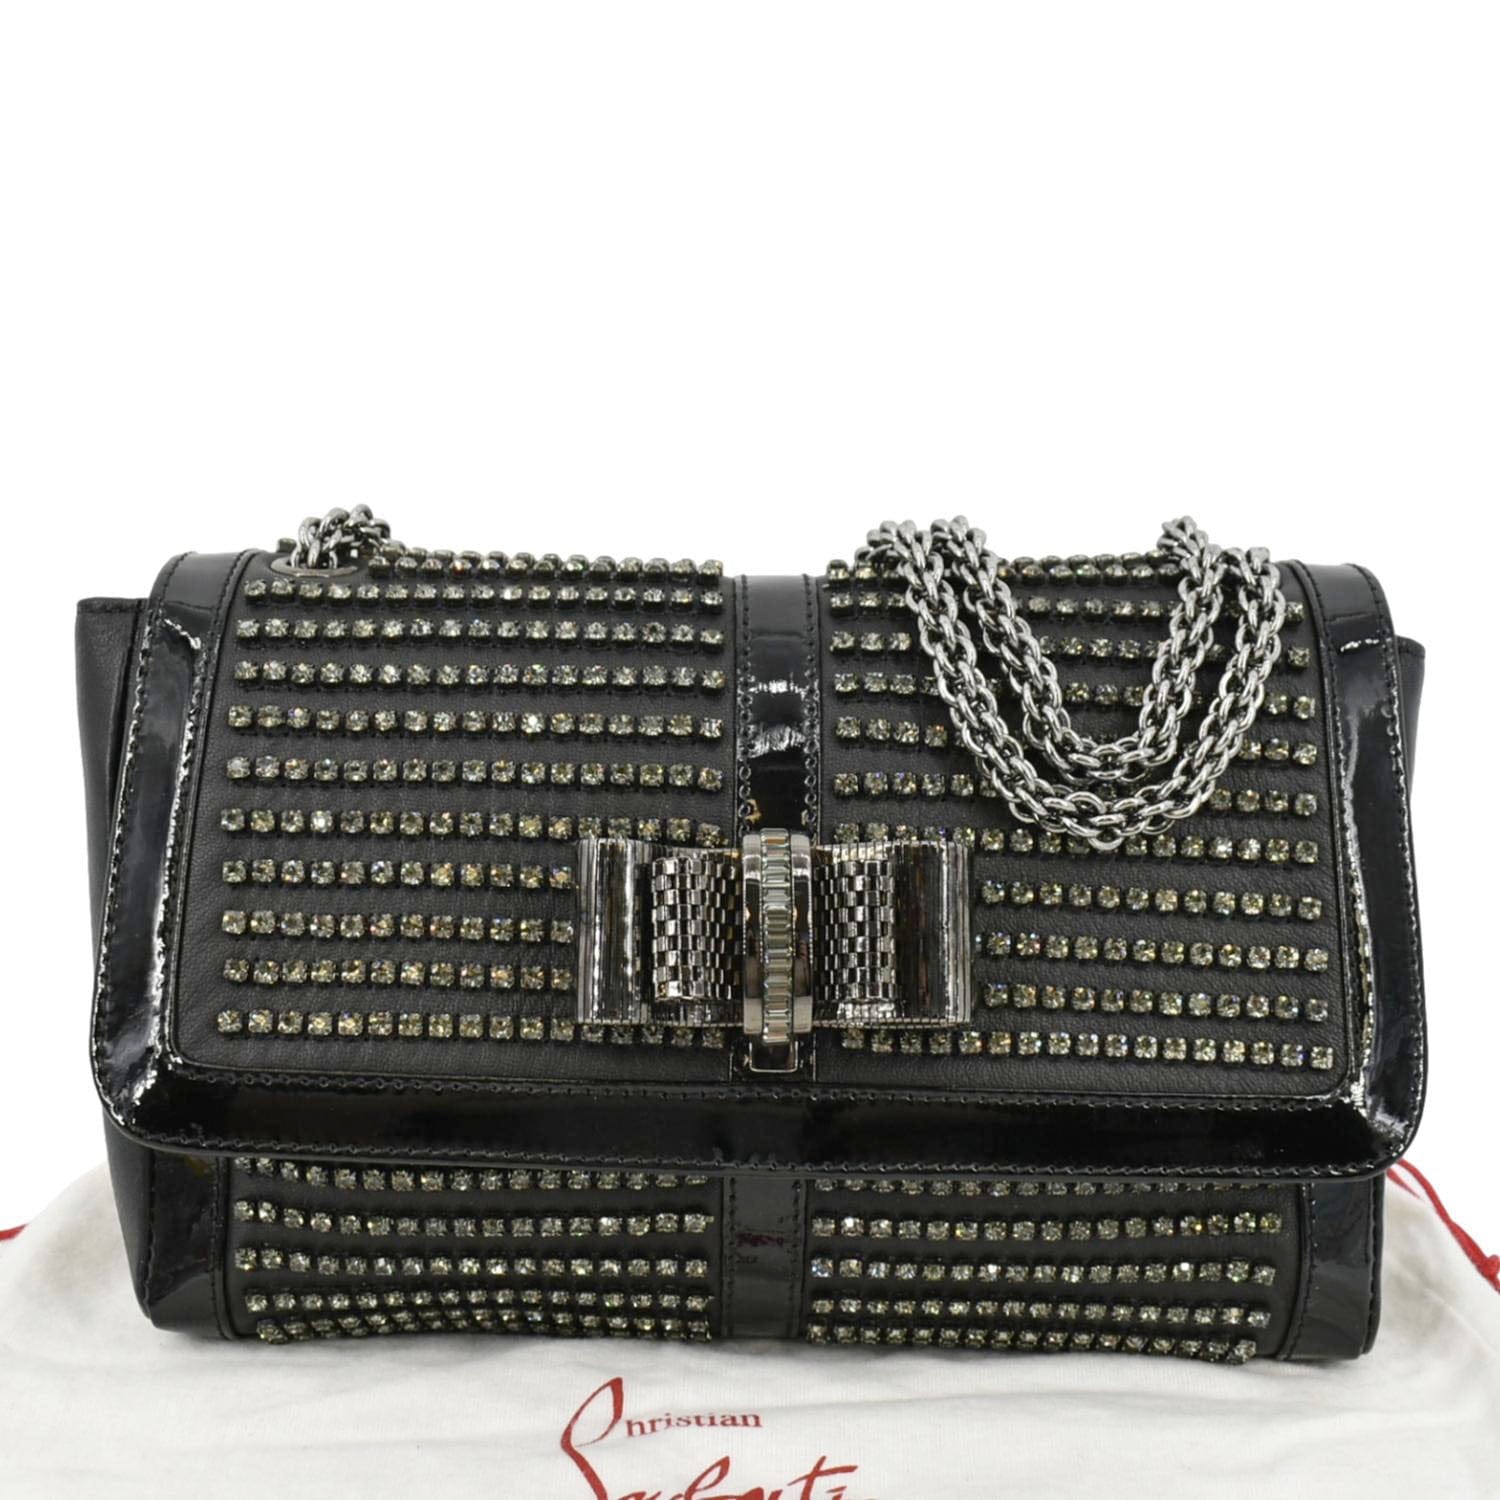 Christian Louboutin Sweet Charity Studded Shoulder Bag Pinky Leather Small